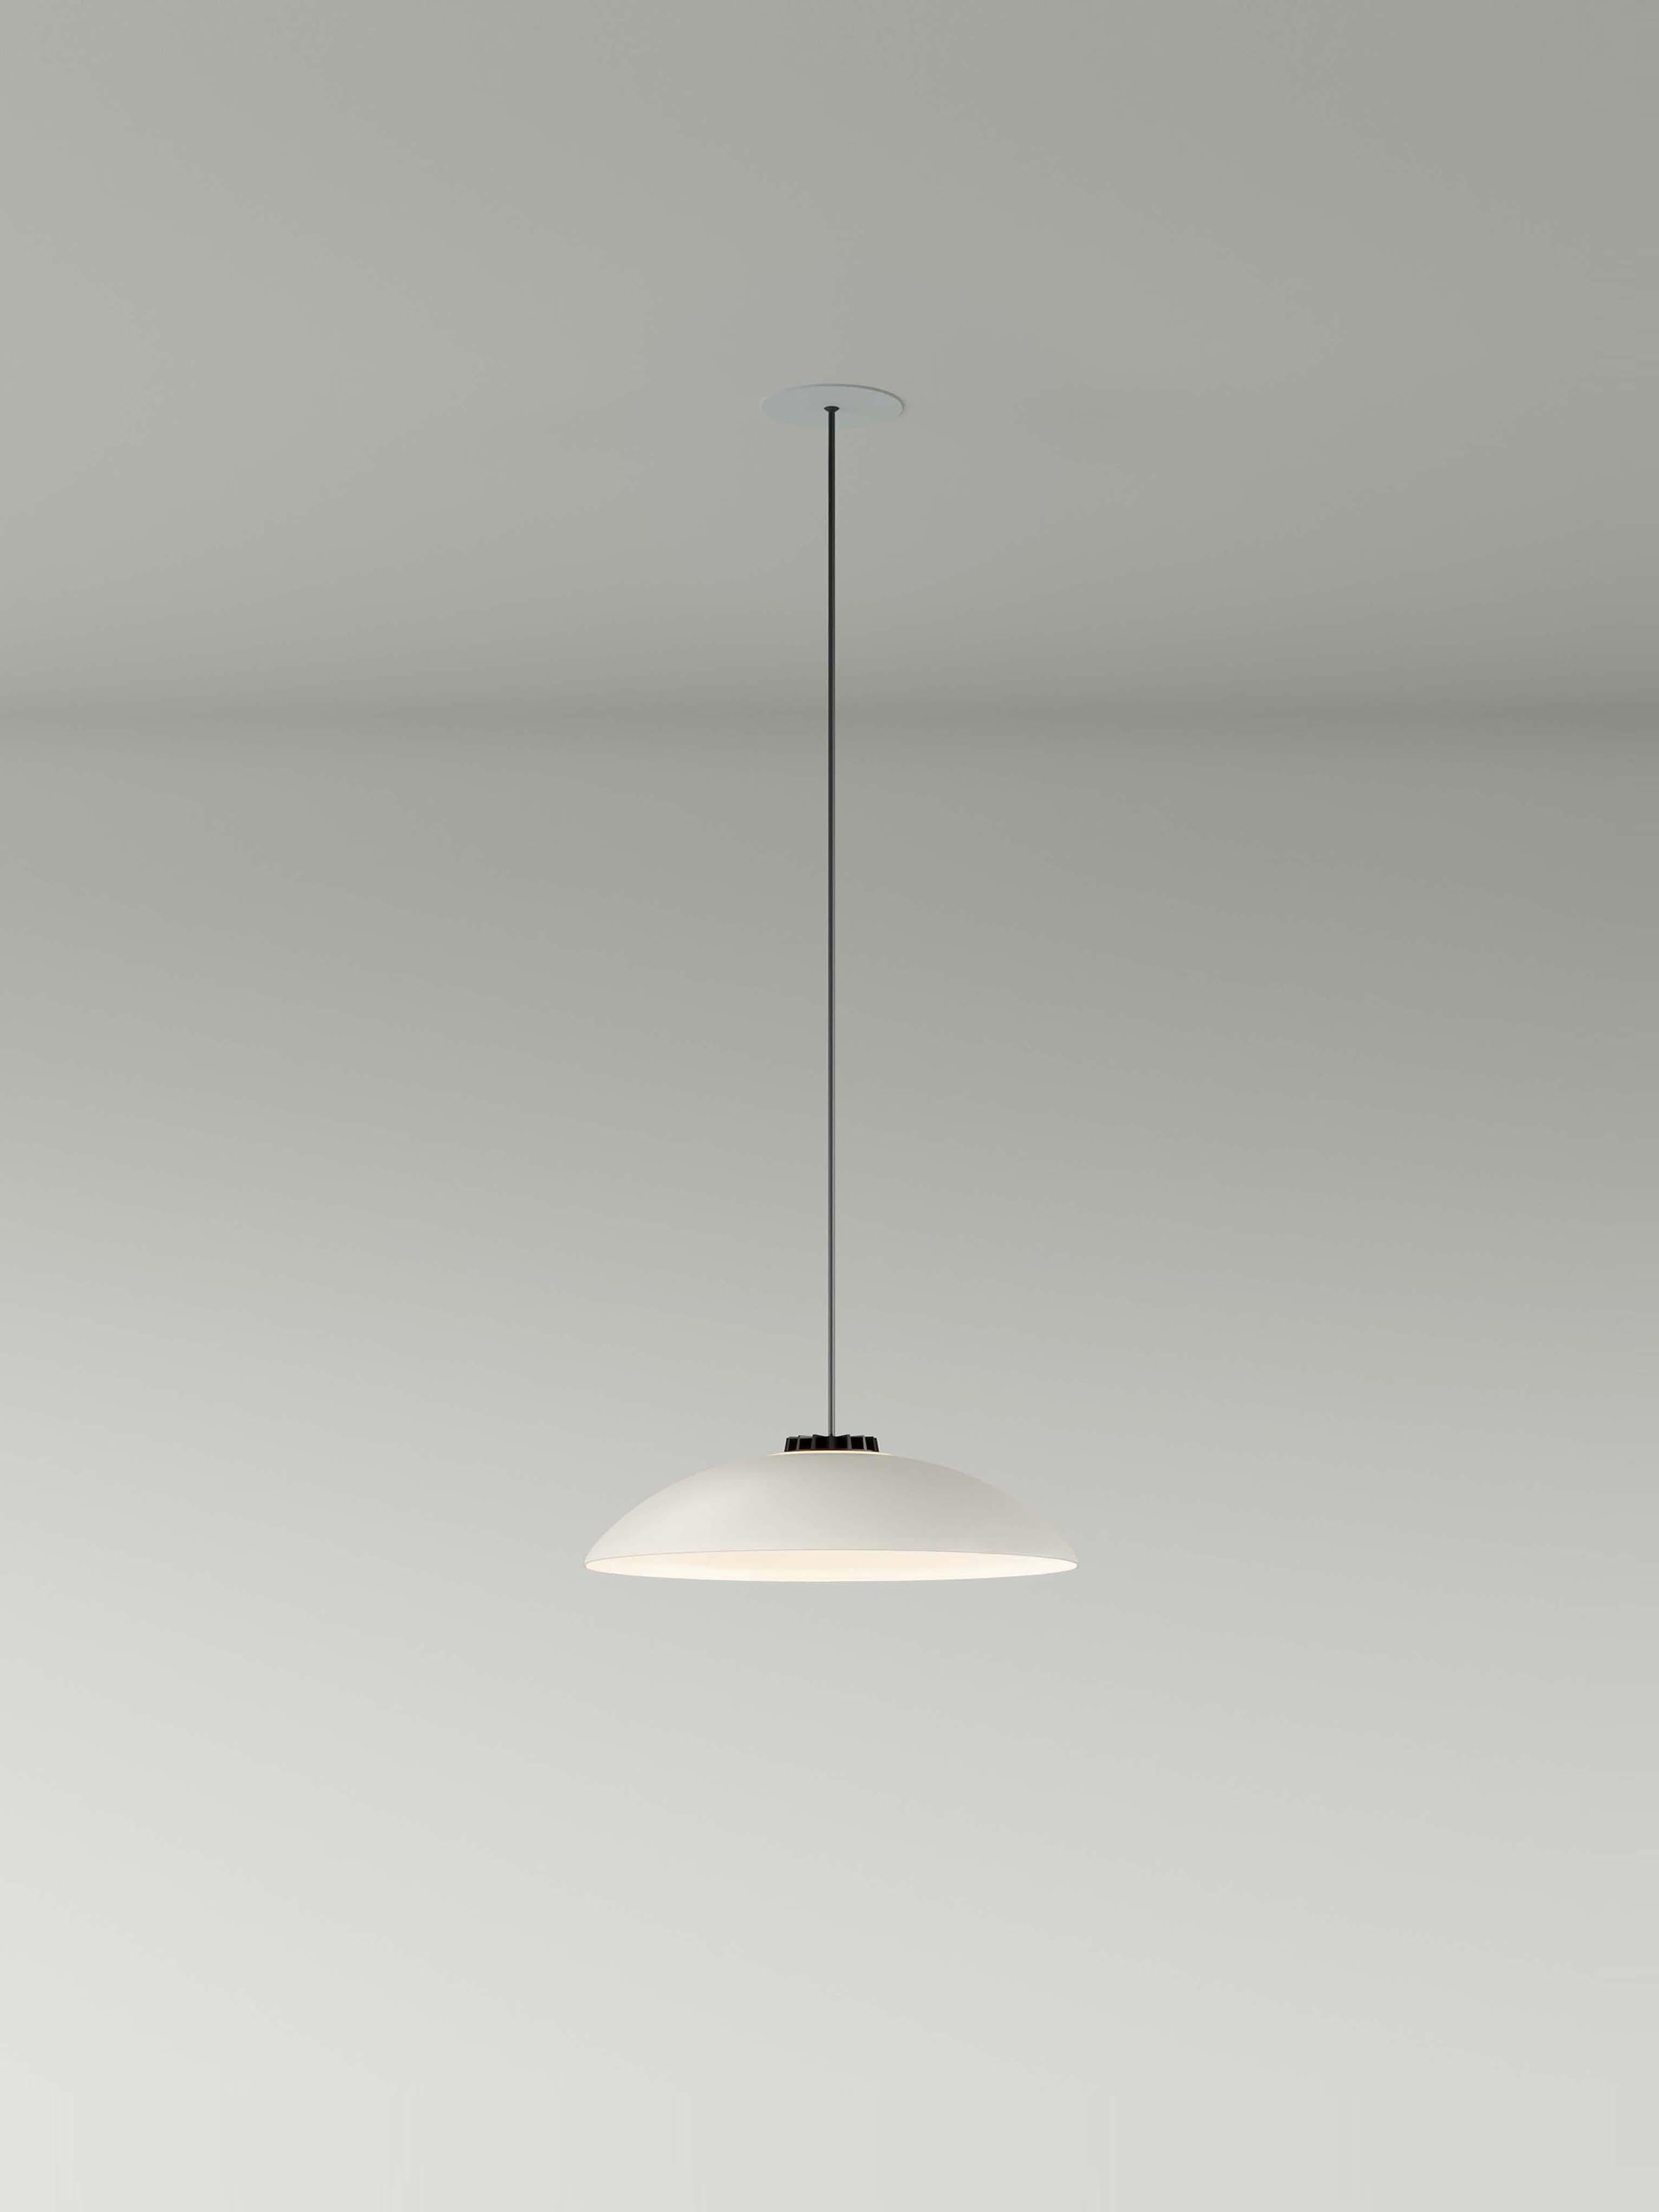 Small white headhat plate pendant lamp by Santa & Cole
Dimensions: D 35 x H 9 cm
Materials: Metal.
Cable lenght: 3mts.
Available in other colors and sizes. Available in 2 cable lengths: 3mts, 8mts.
Availalble in 2 canopy colors: black or